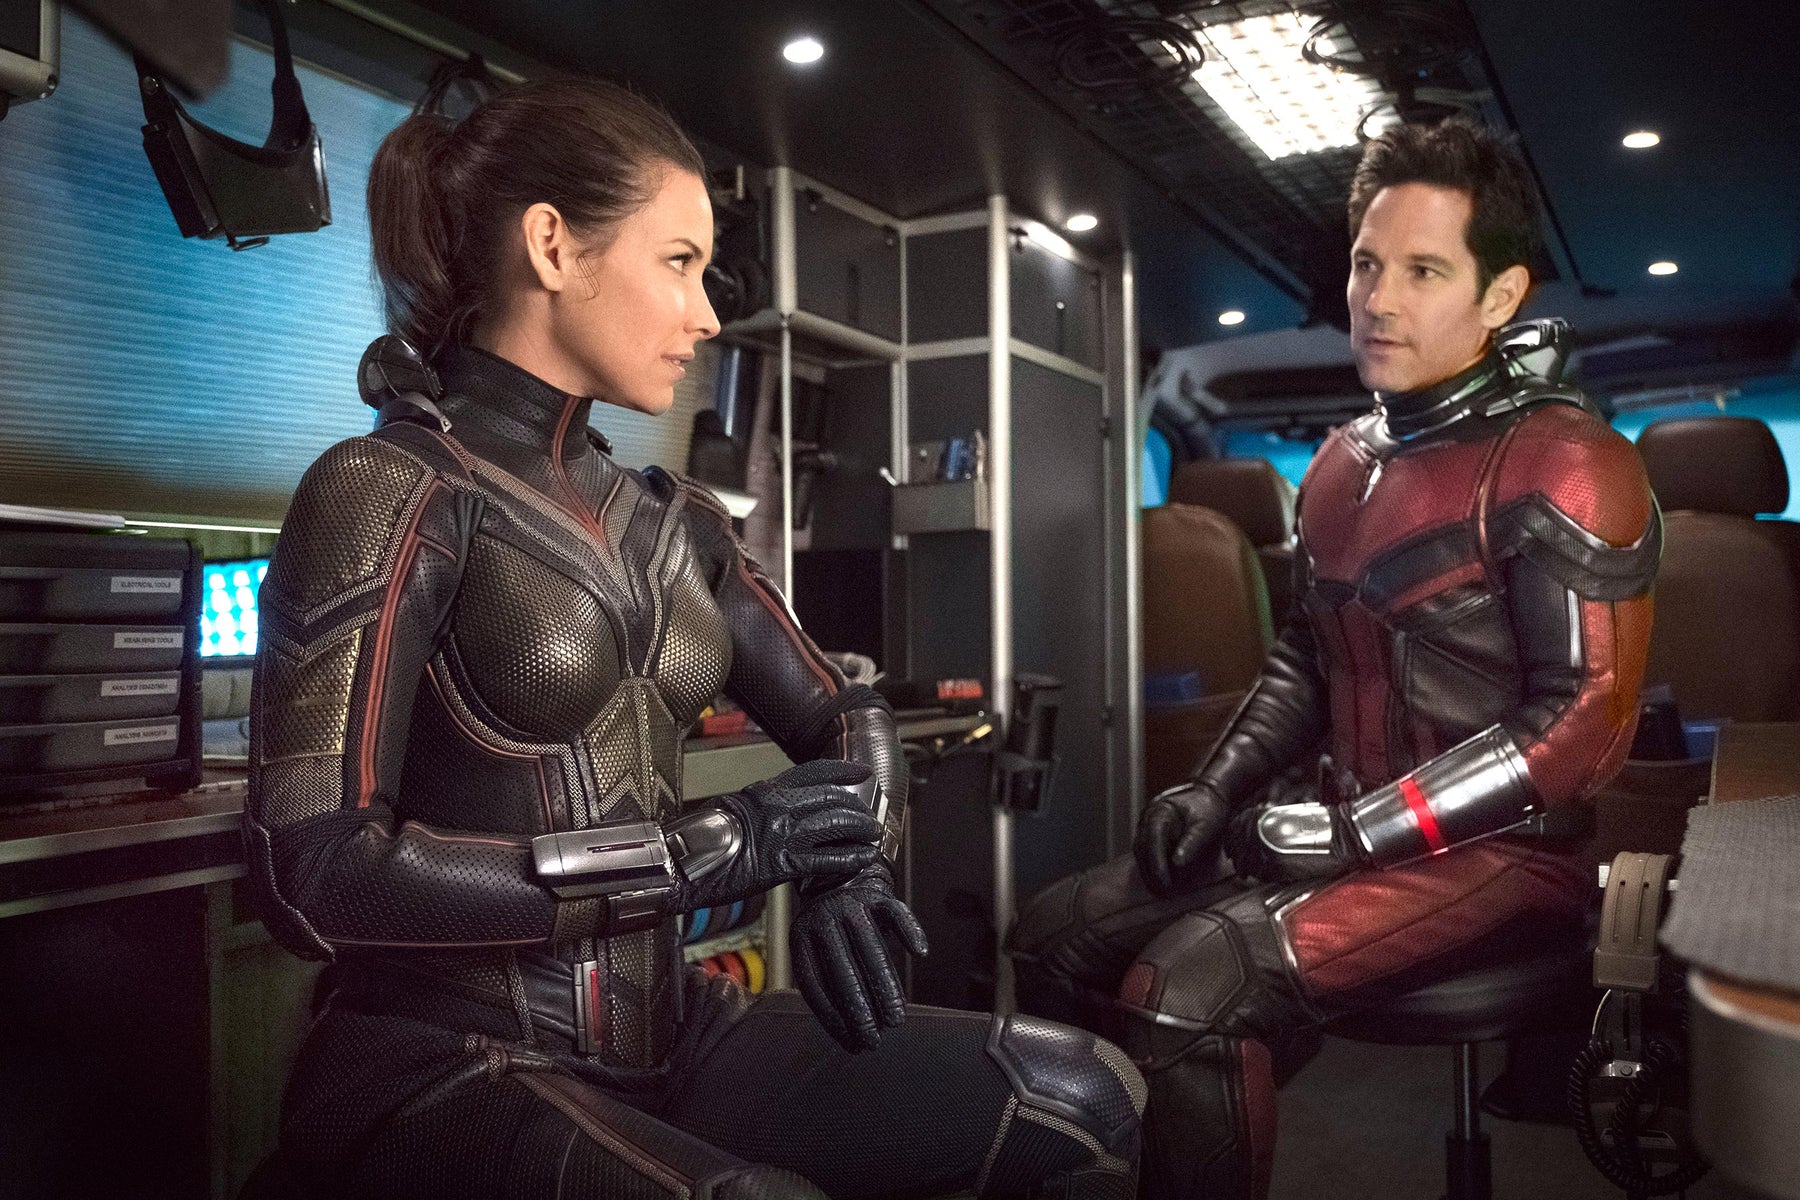 Twitter Is Getting All Hyped With The Amazing Reviews On Ant-Man and the Wasp! Seems like another Marvel Hit!